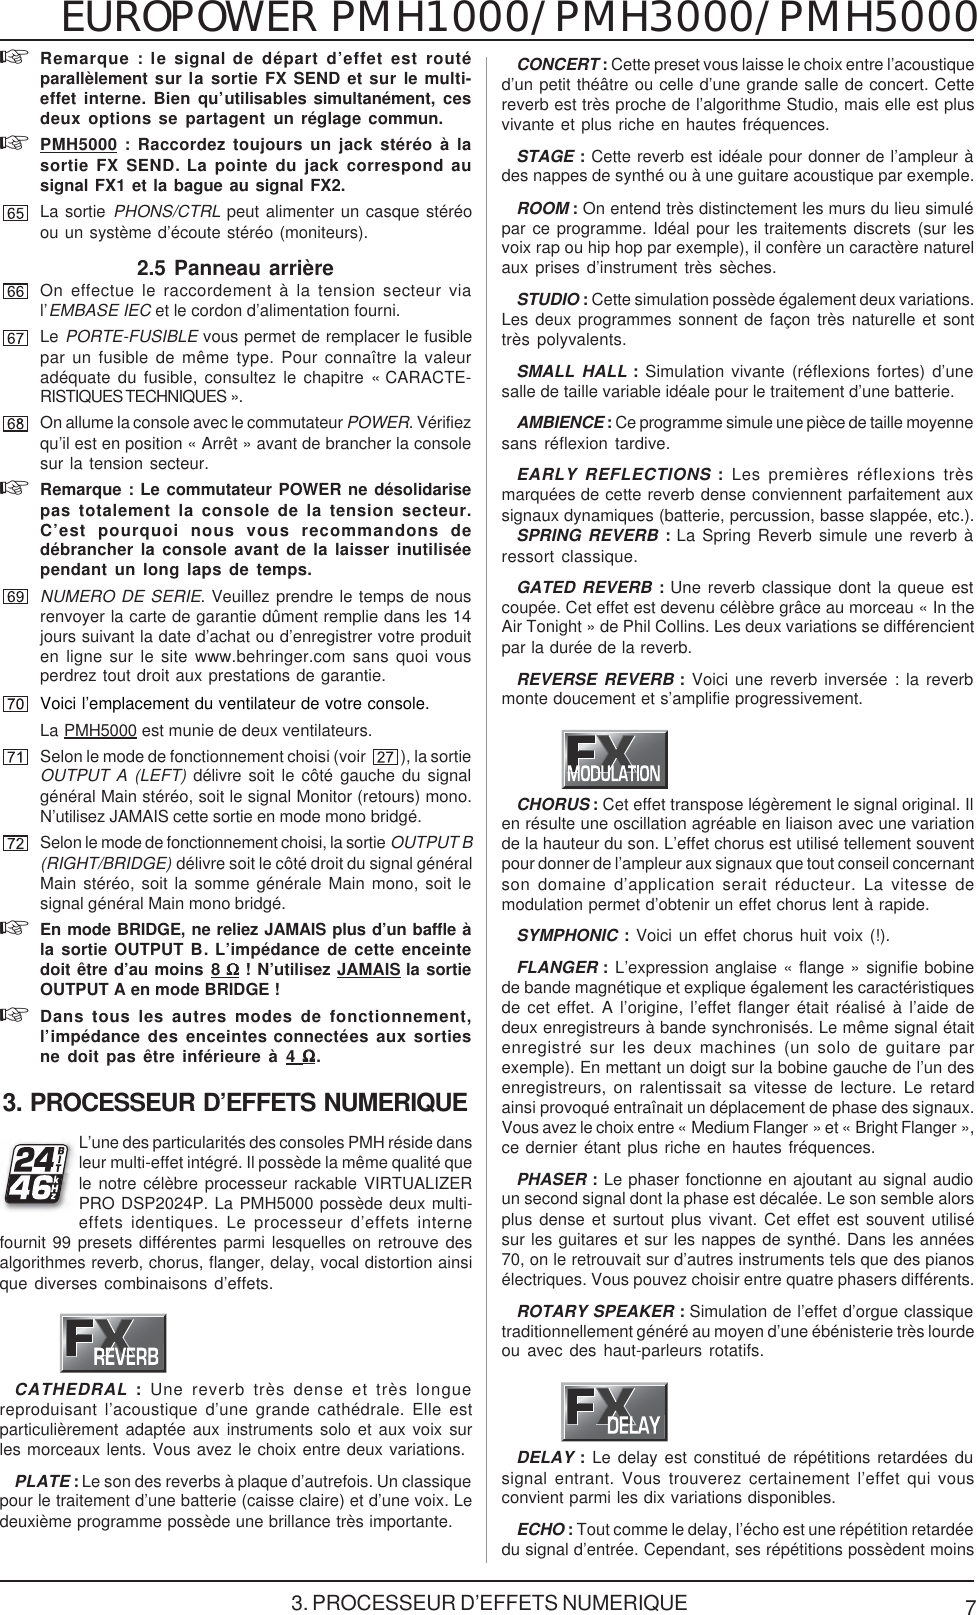 Page 7 of 12 - Behringer PMH1000 User Manual (French) P0115 M FR